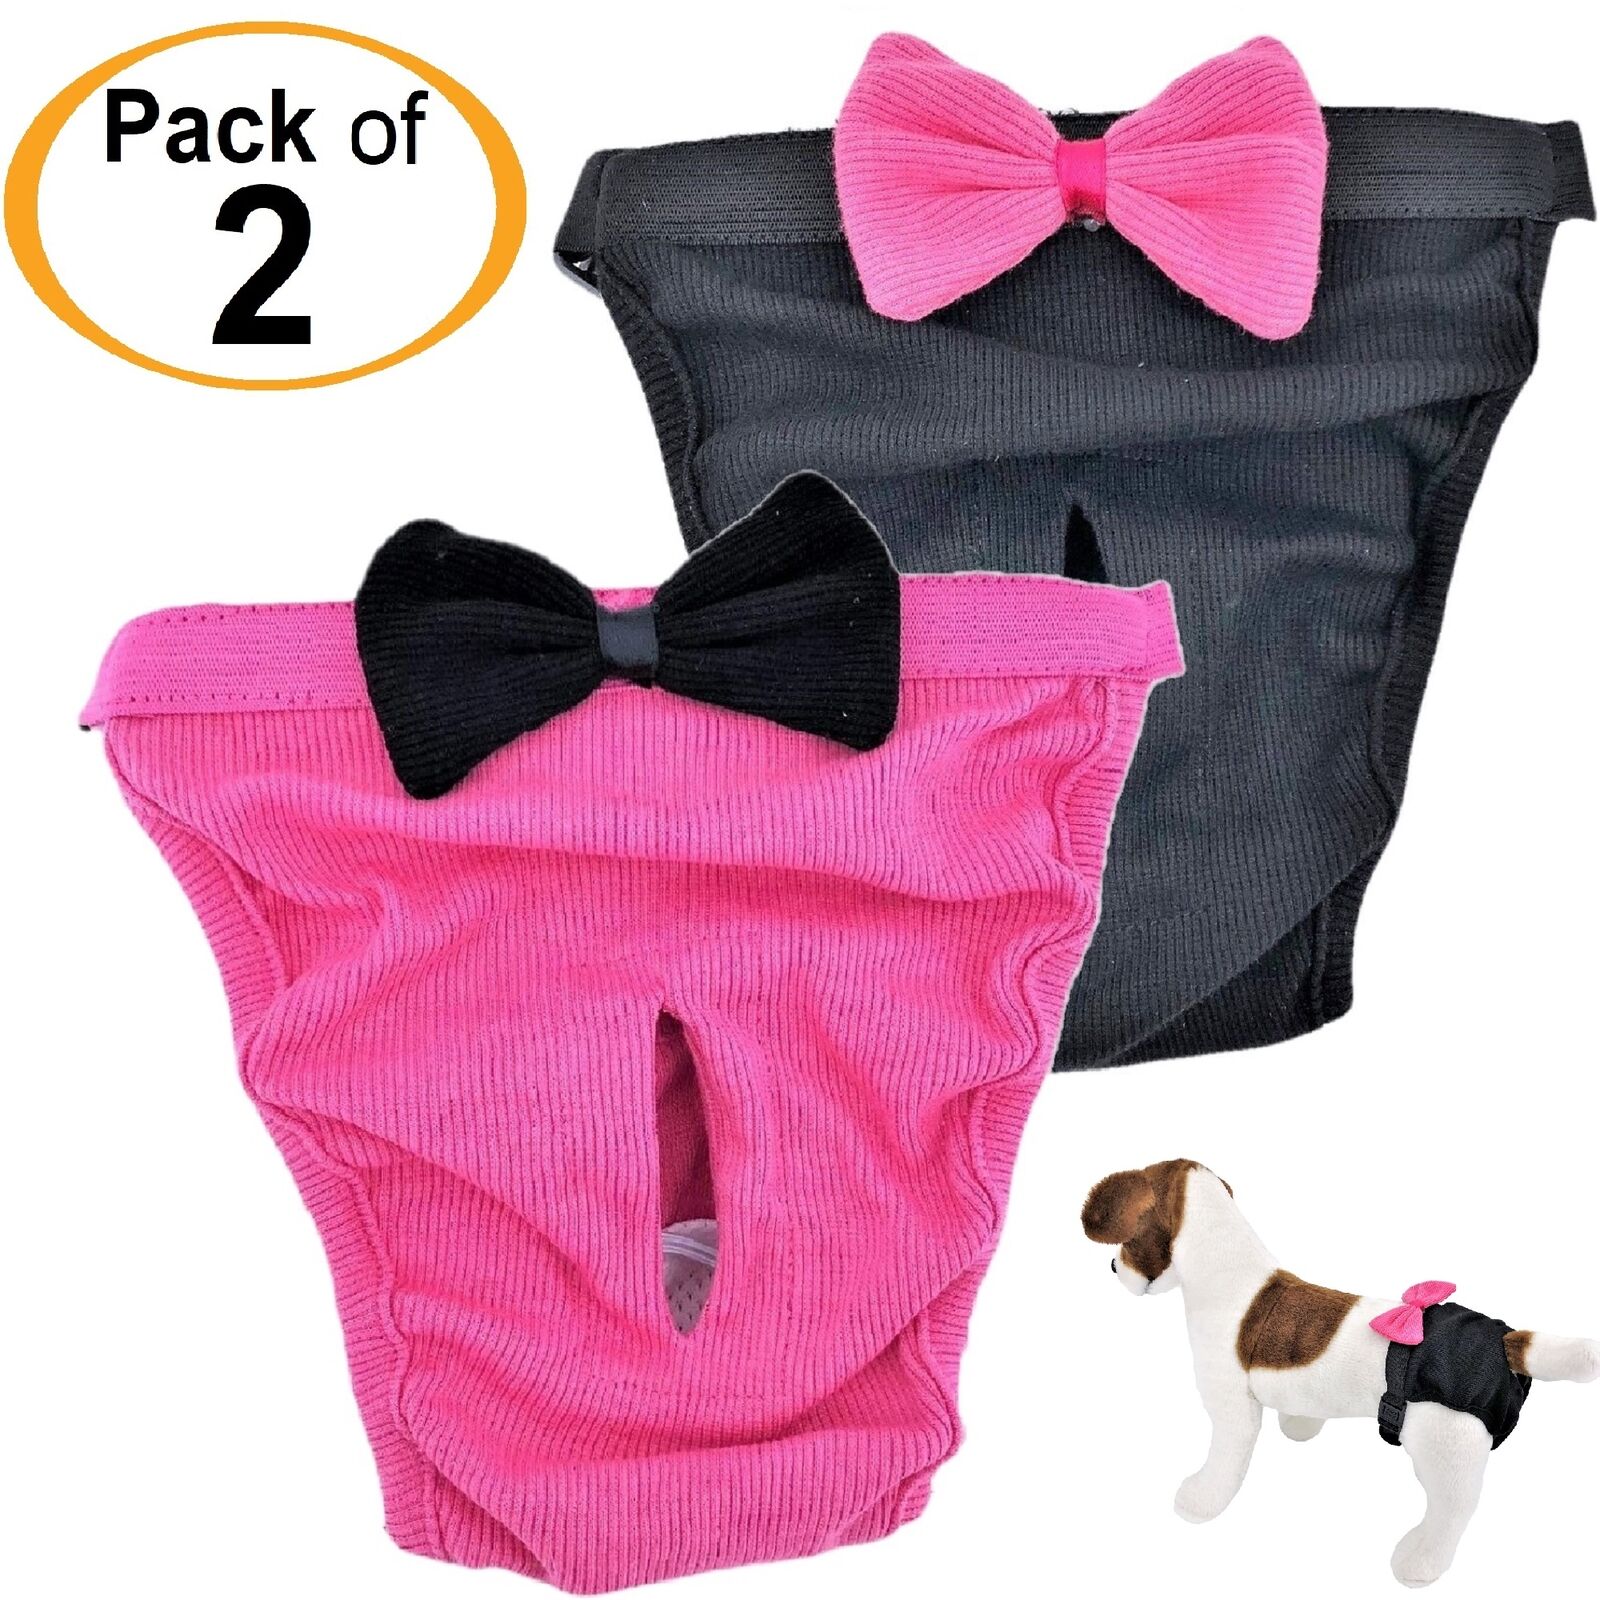 PACK- 2 Dog Diapers Female Cat Girl SMALL and LARGE Pets 100% Cotton Pink Black FDC®